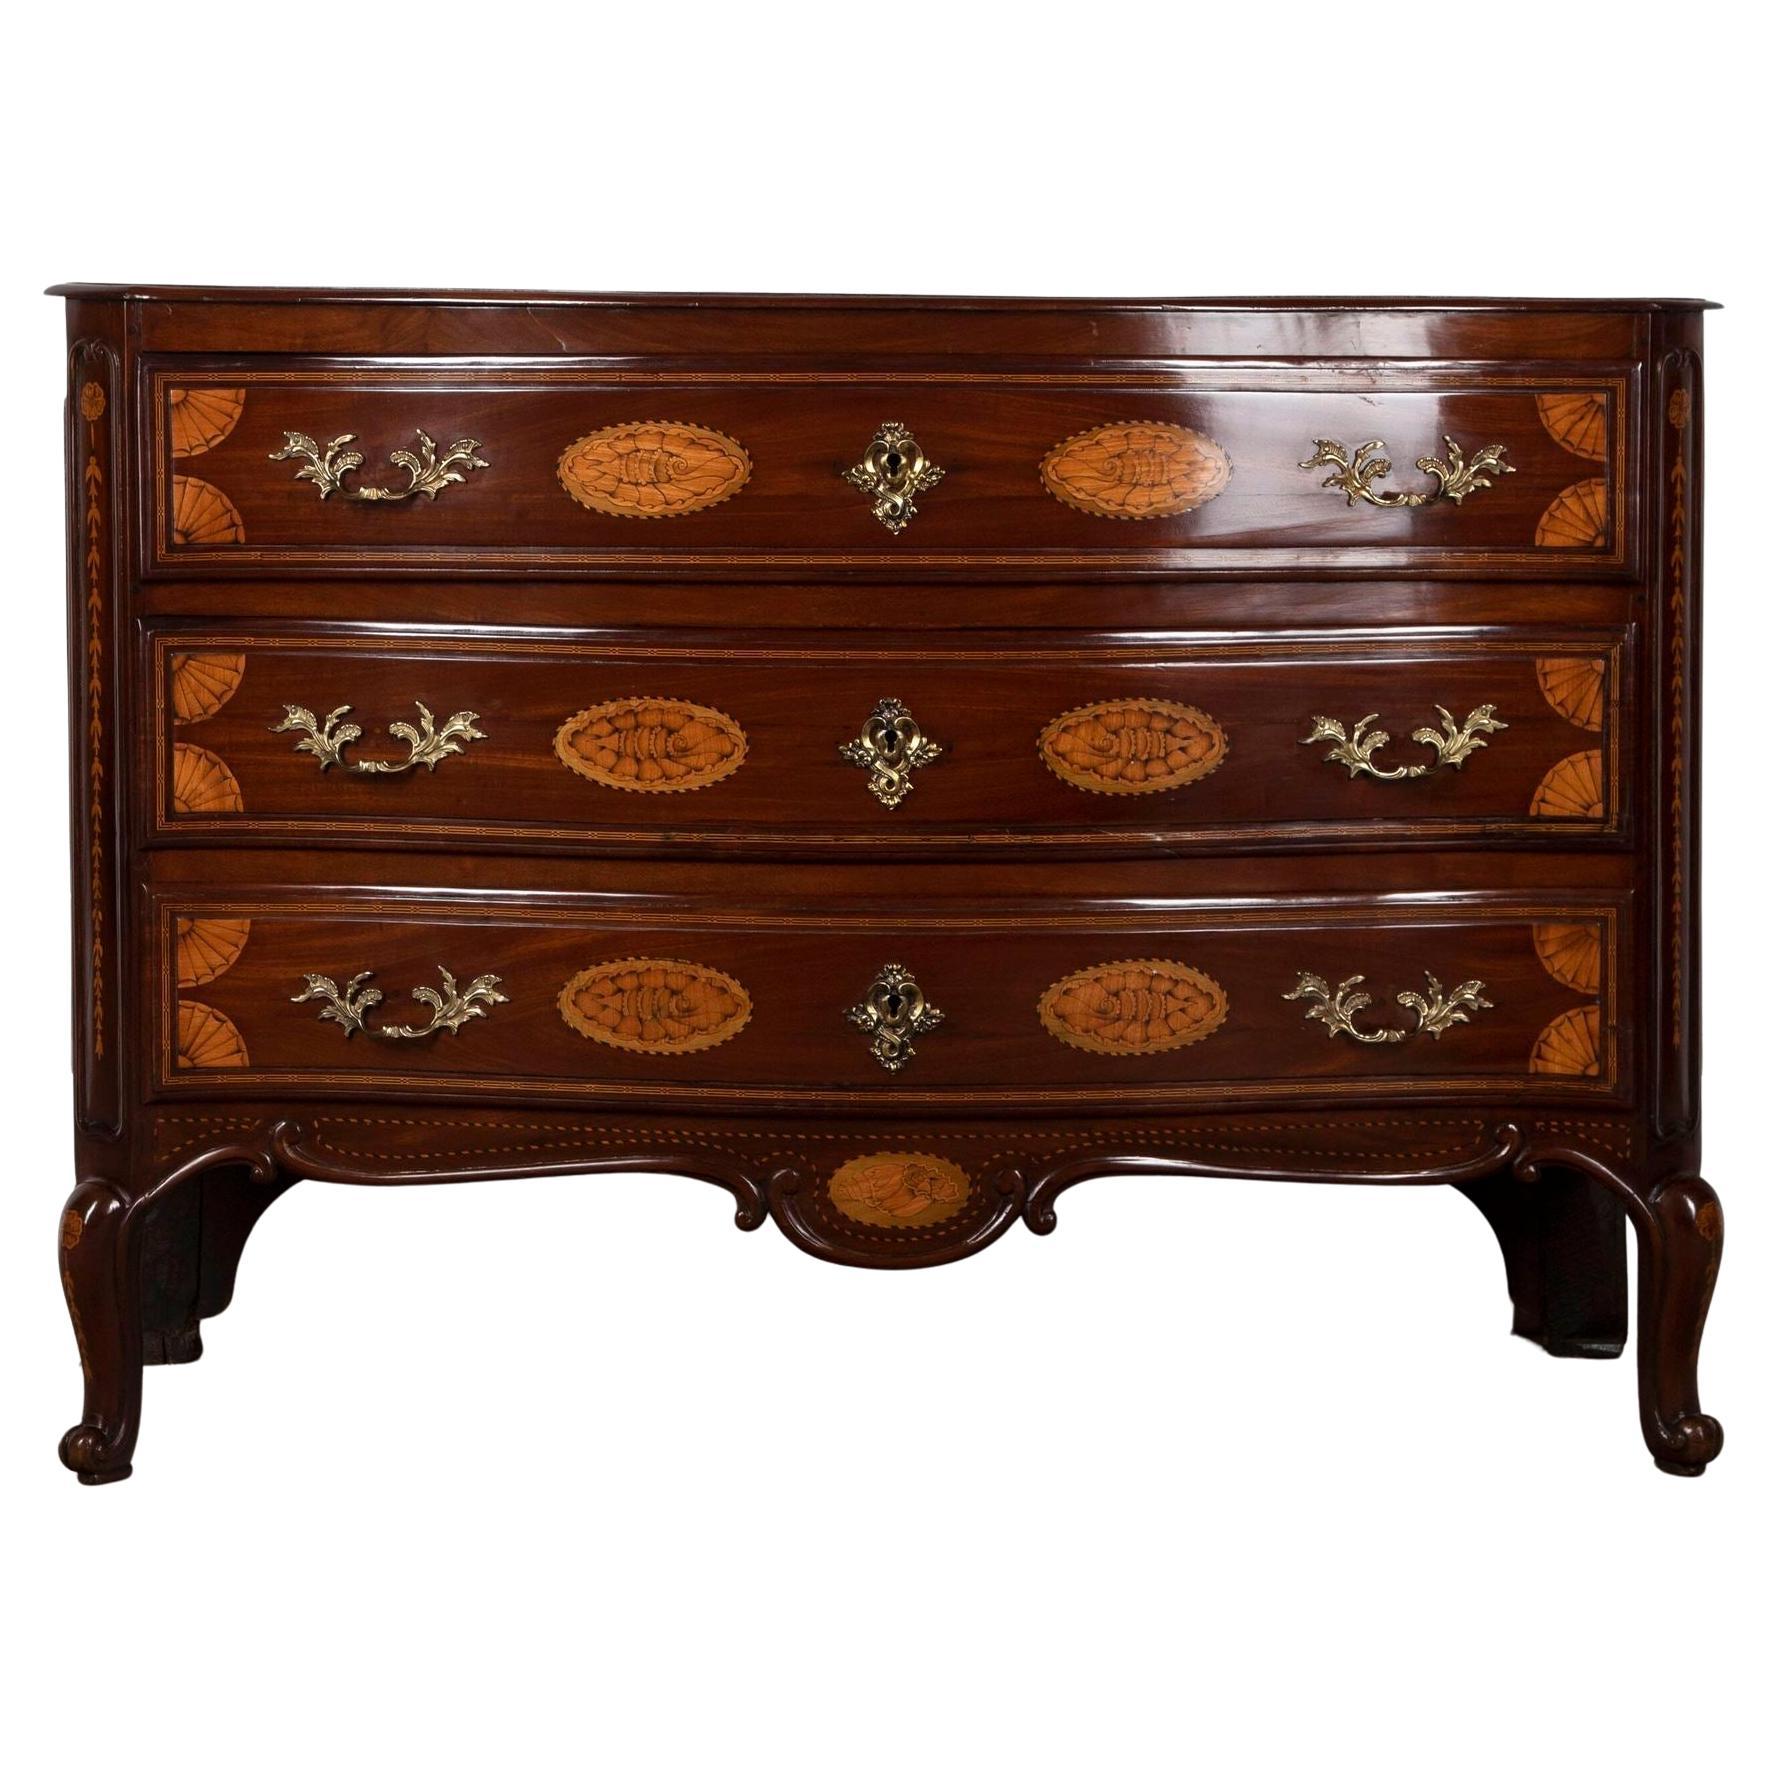 18th Century Serpentine Front Commode